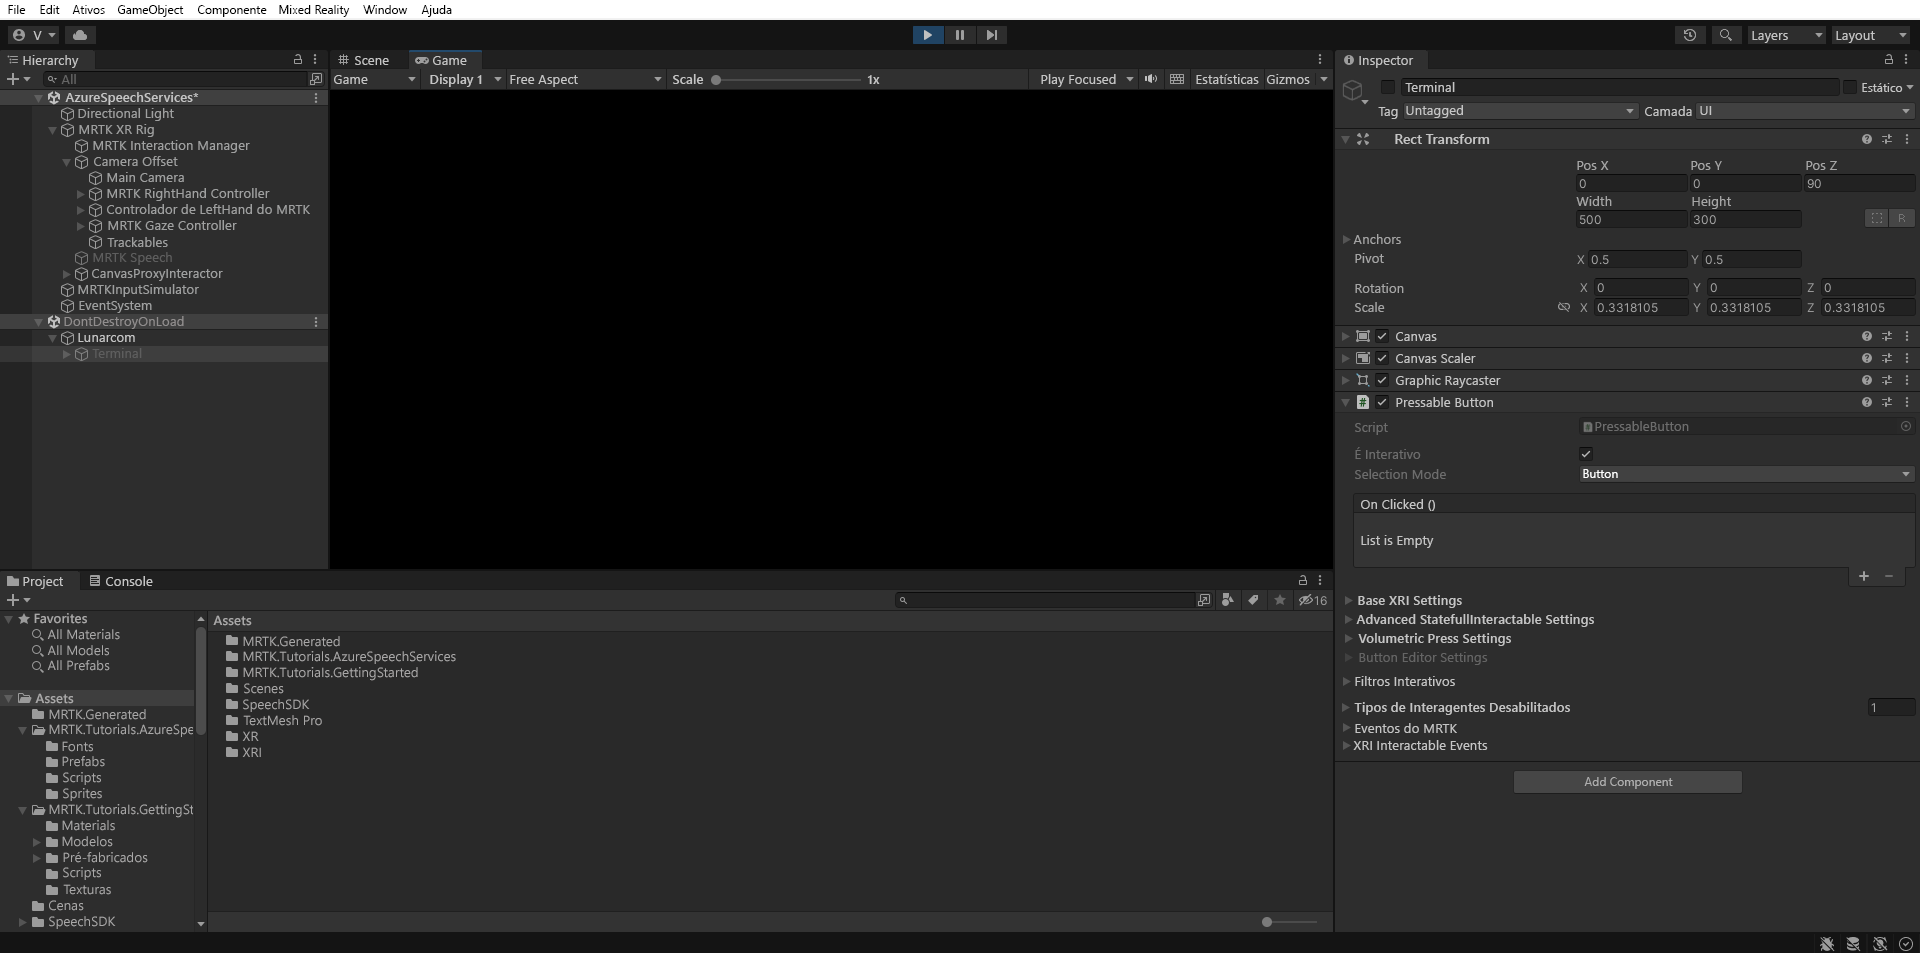 Screenshot of Unity editor in play mode with speech recognizer feature in use